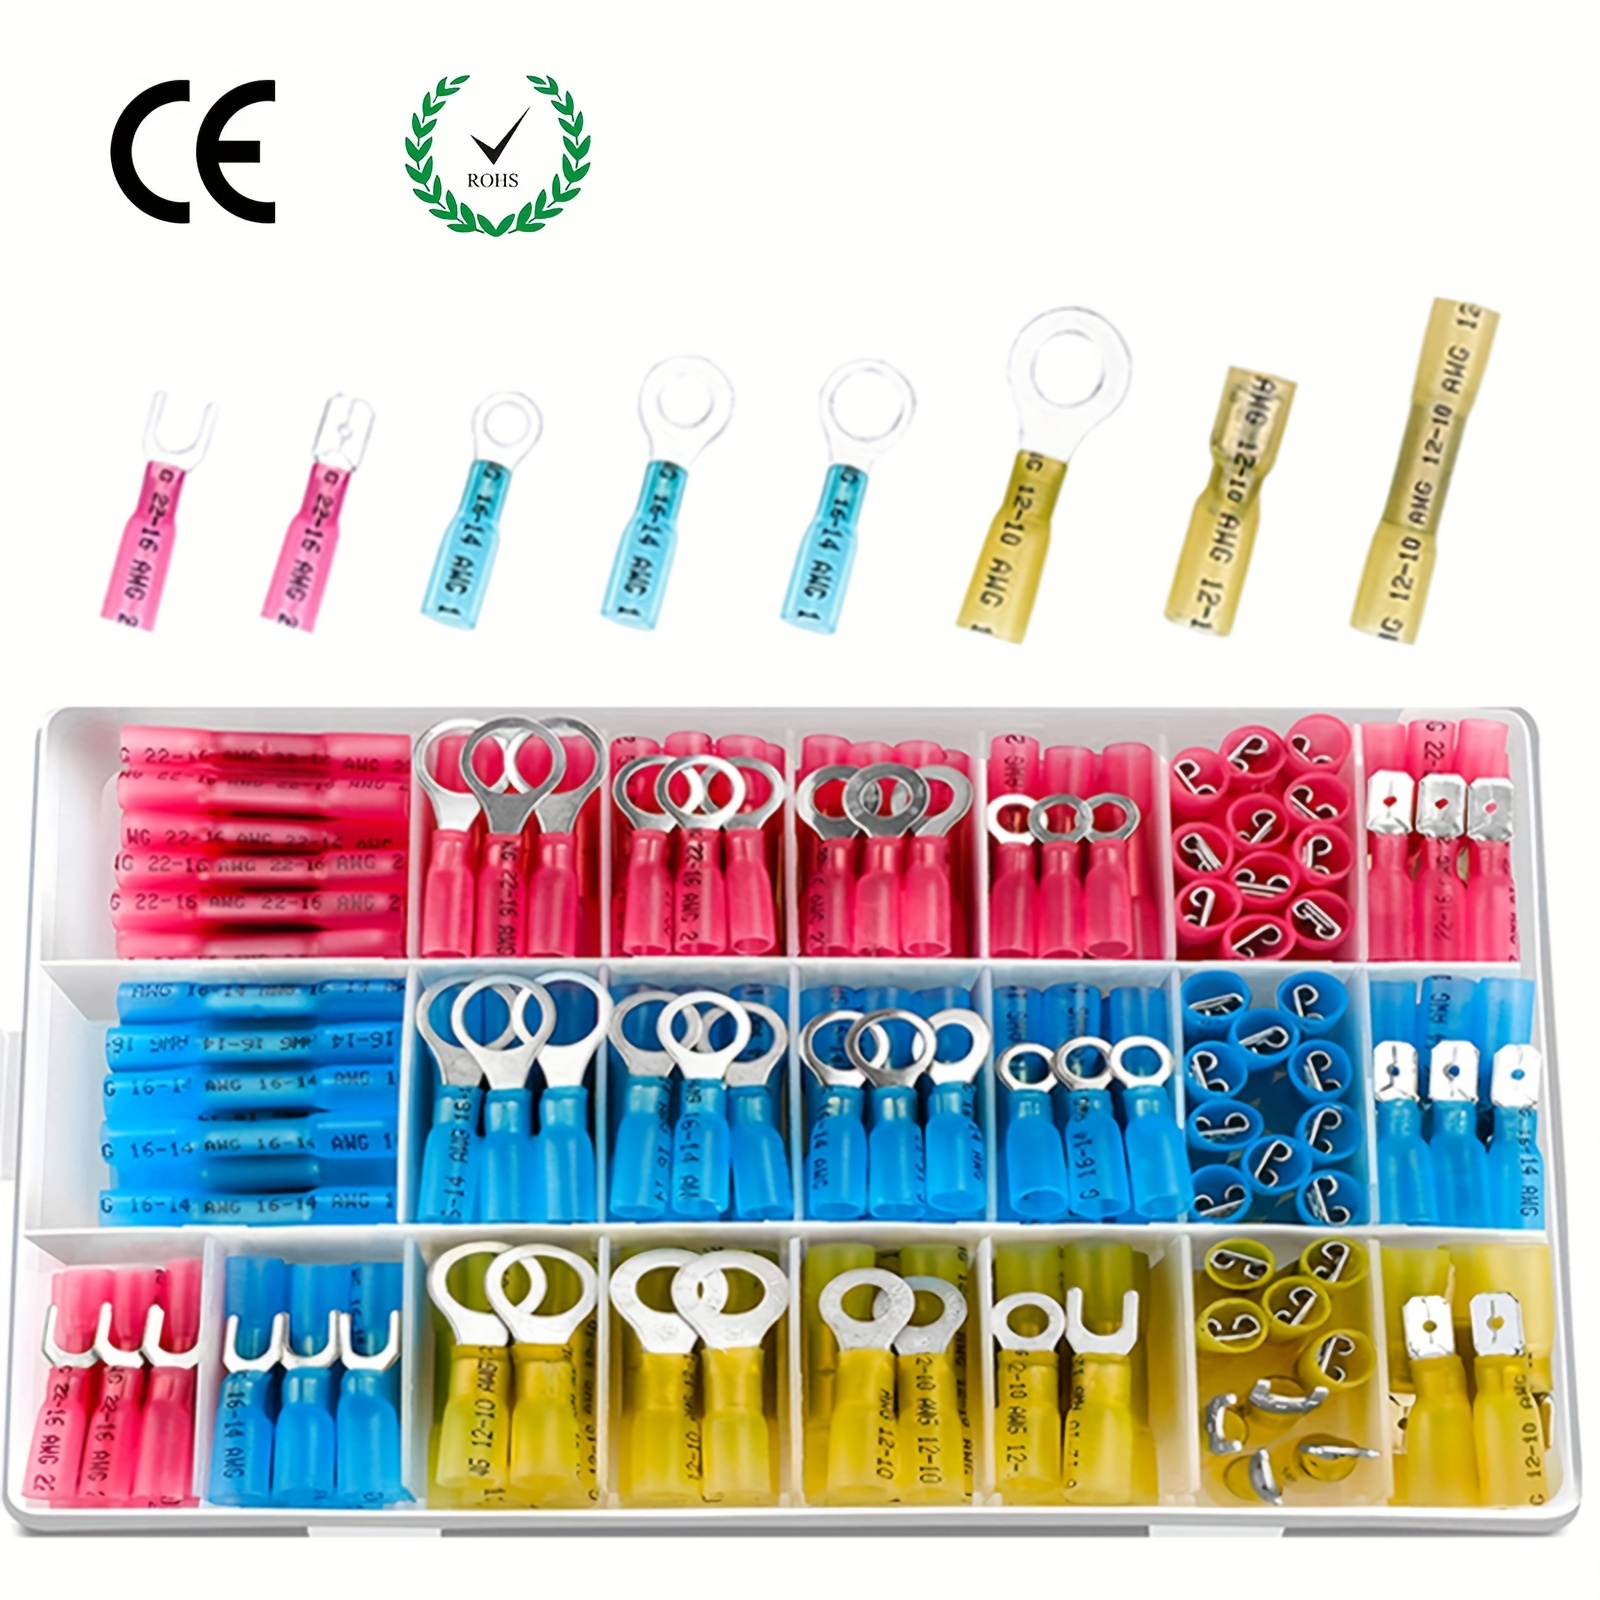  1200PCS Electrical Connector Kit-Sopoby Automotive Insulated  CrimpTerminals Connectors for Wiring Mixed Ring Fork Spade Butt Connector  Set : Industrial & Scientific